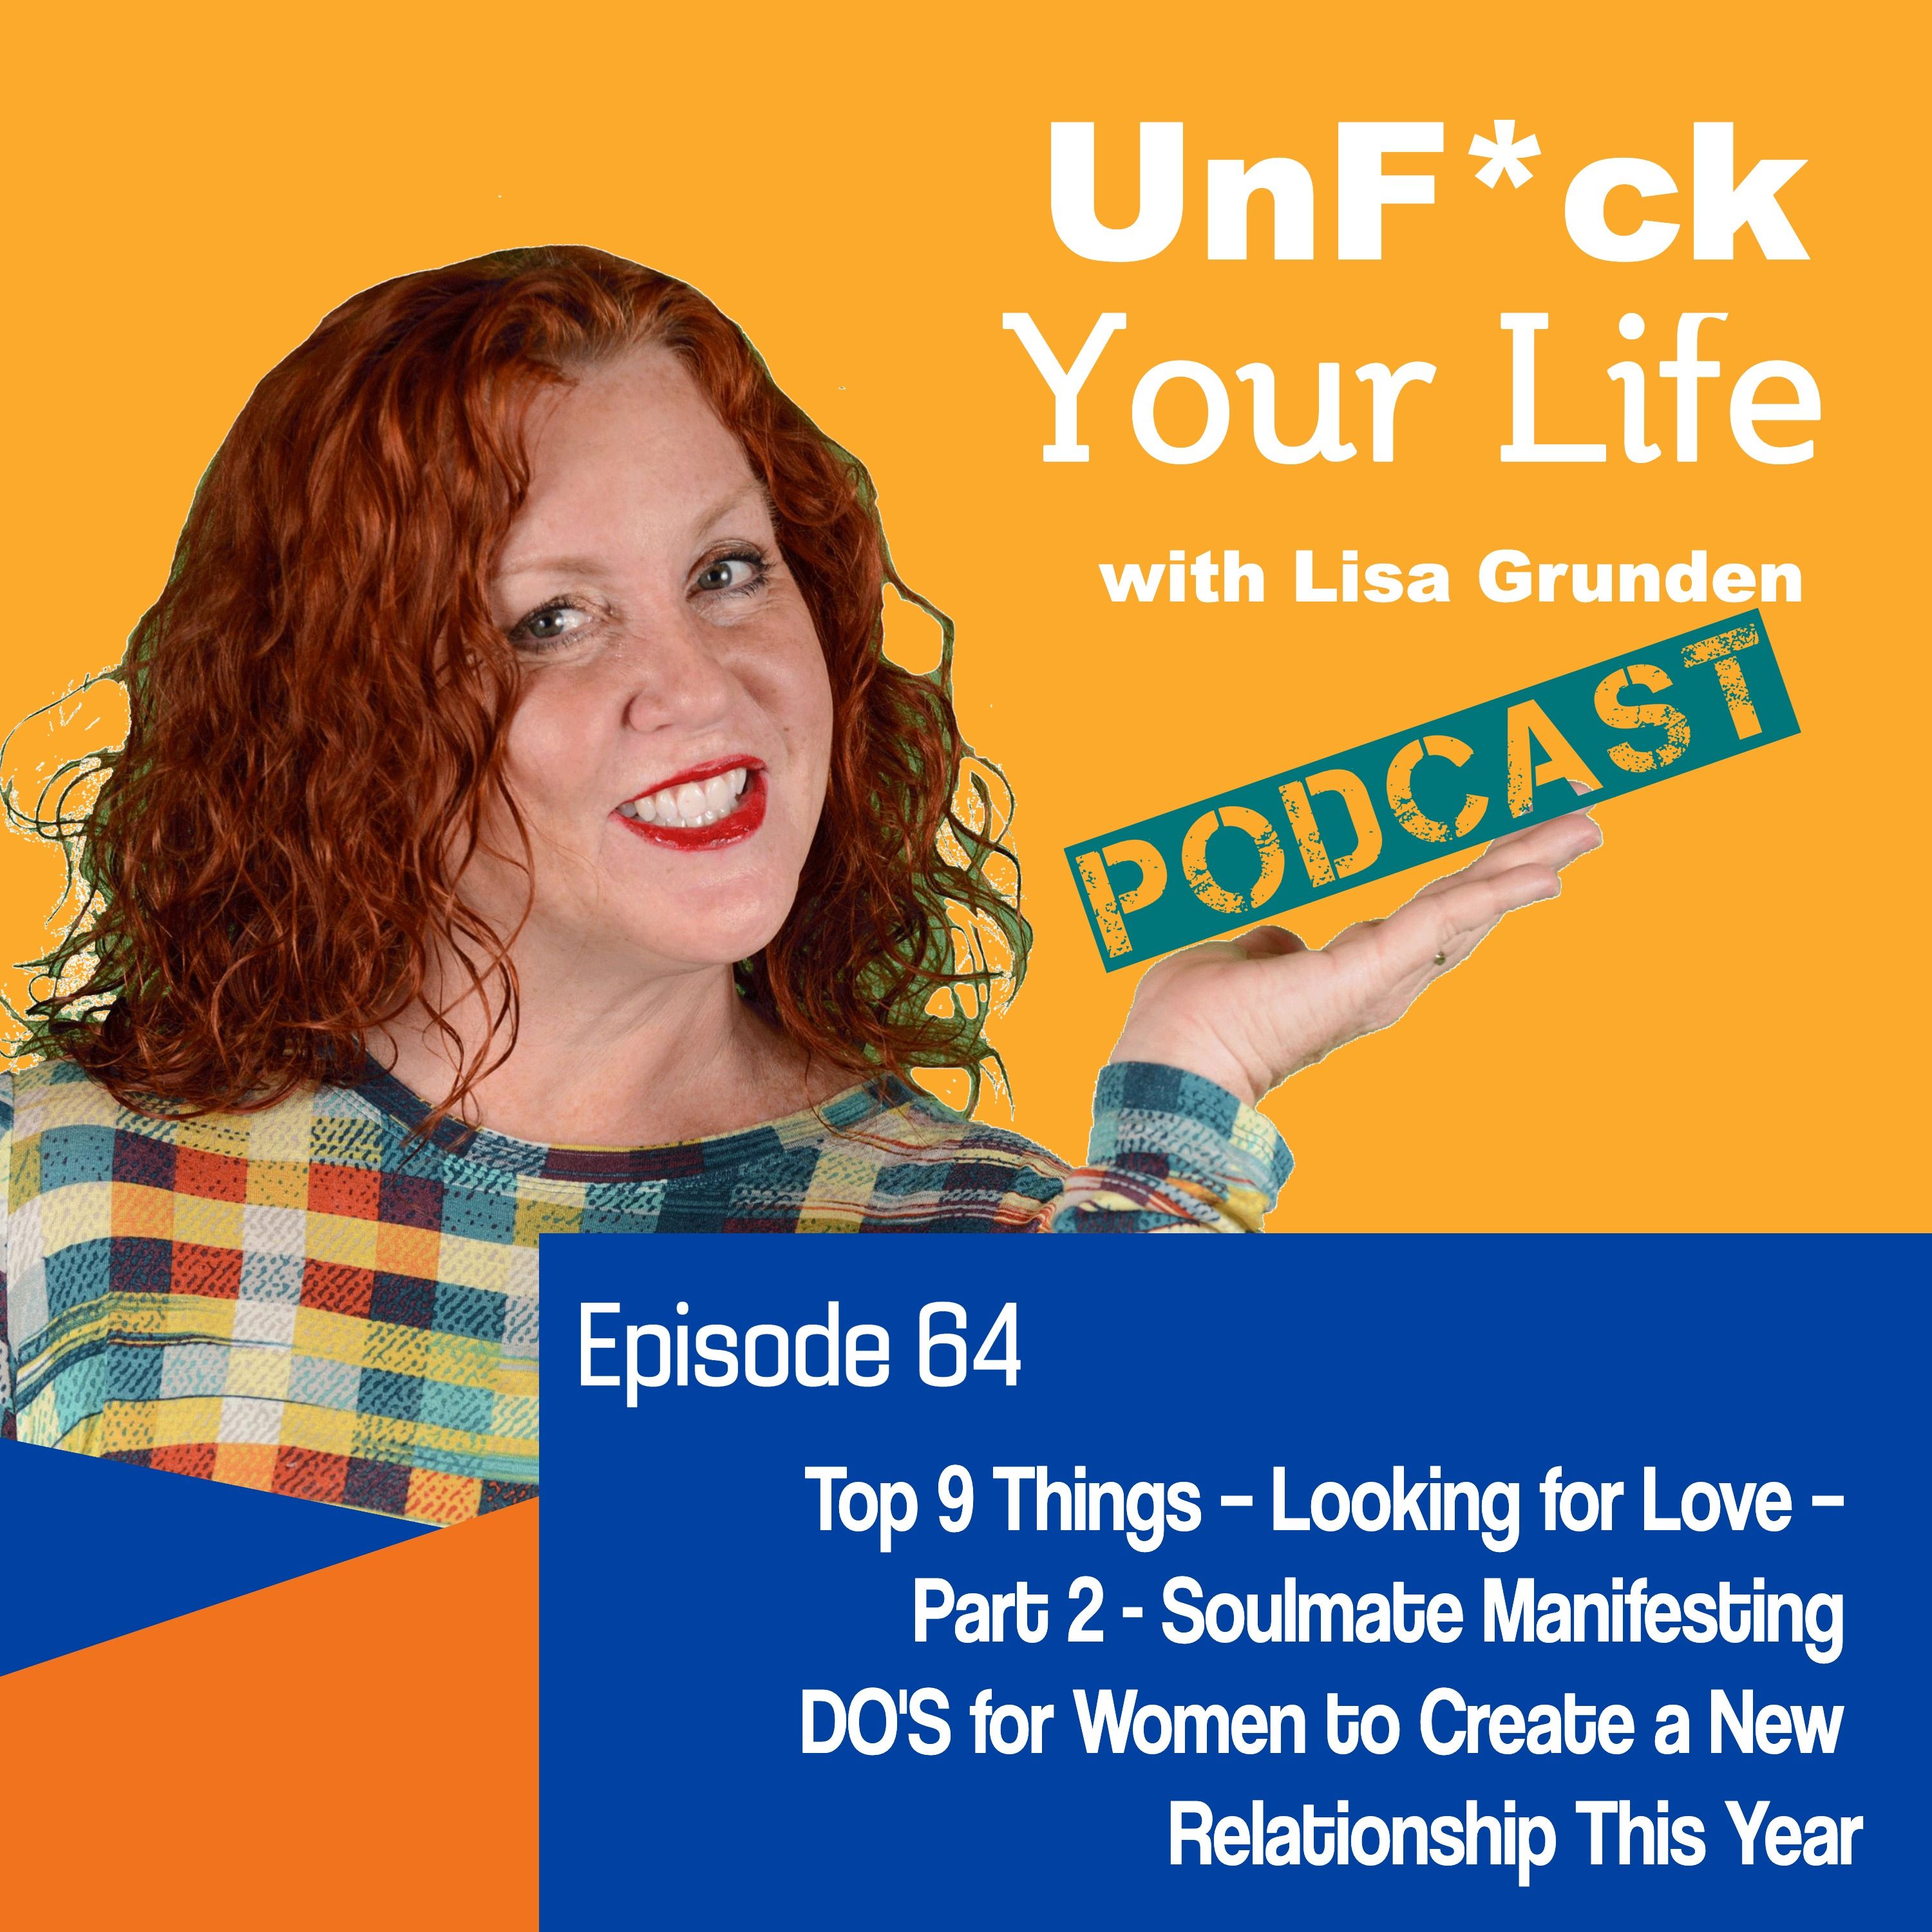 Ep. 64: Top 9 Things - Looking for Love Do's - Part 2 -Soulmate Manifesting DO'S for Women to Create a New Relationship This Year